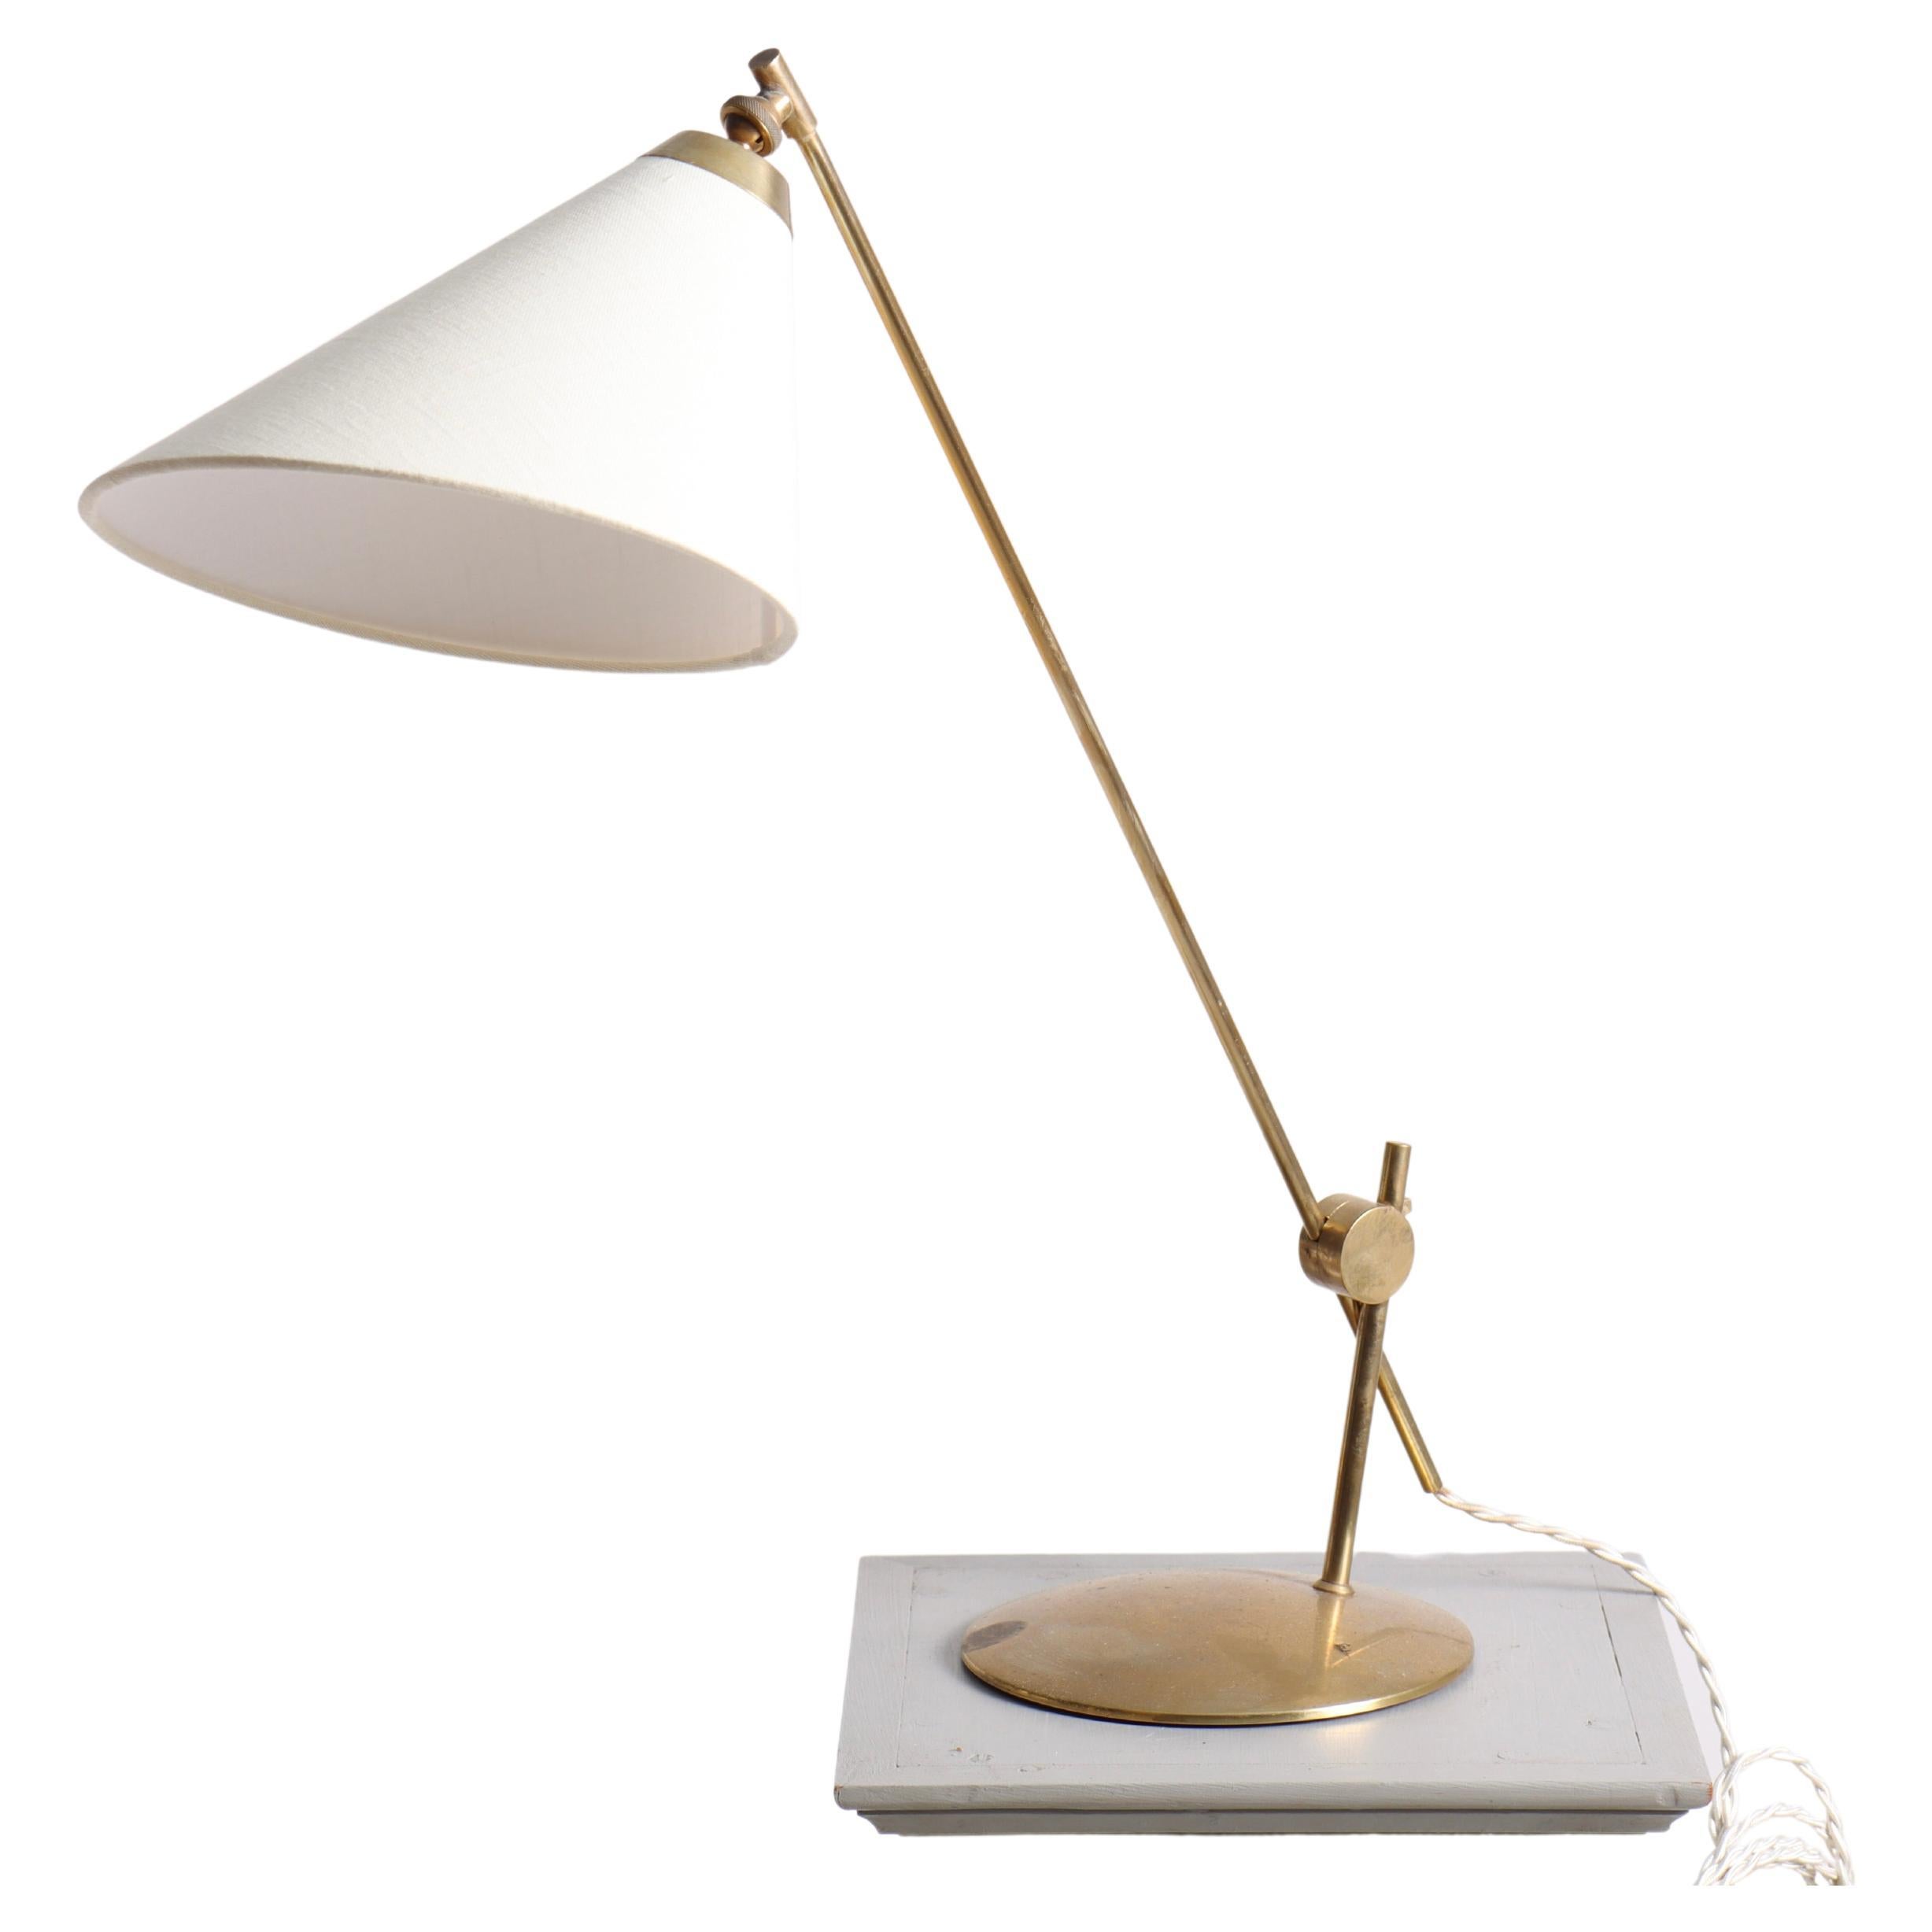 Midcentury Table Lamp Designed by Th. Valentiner, Made in Denmark, 1950s